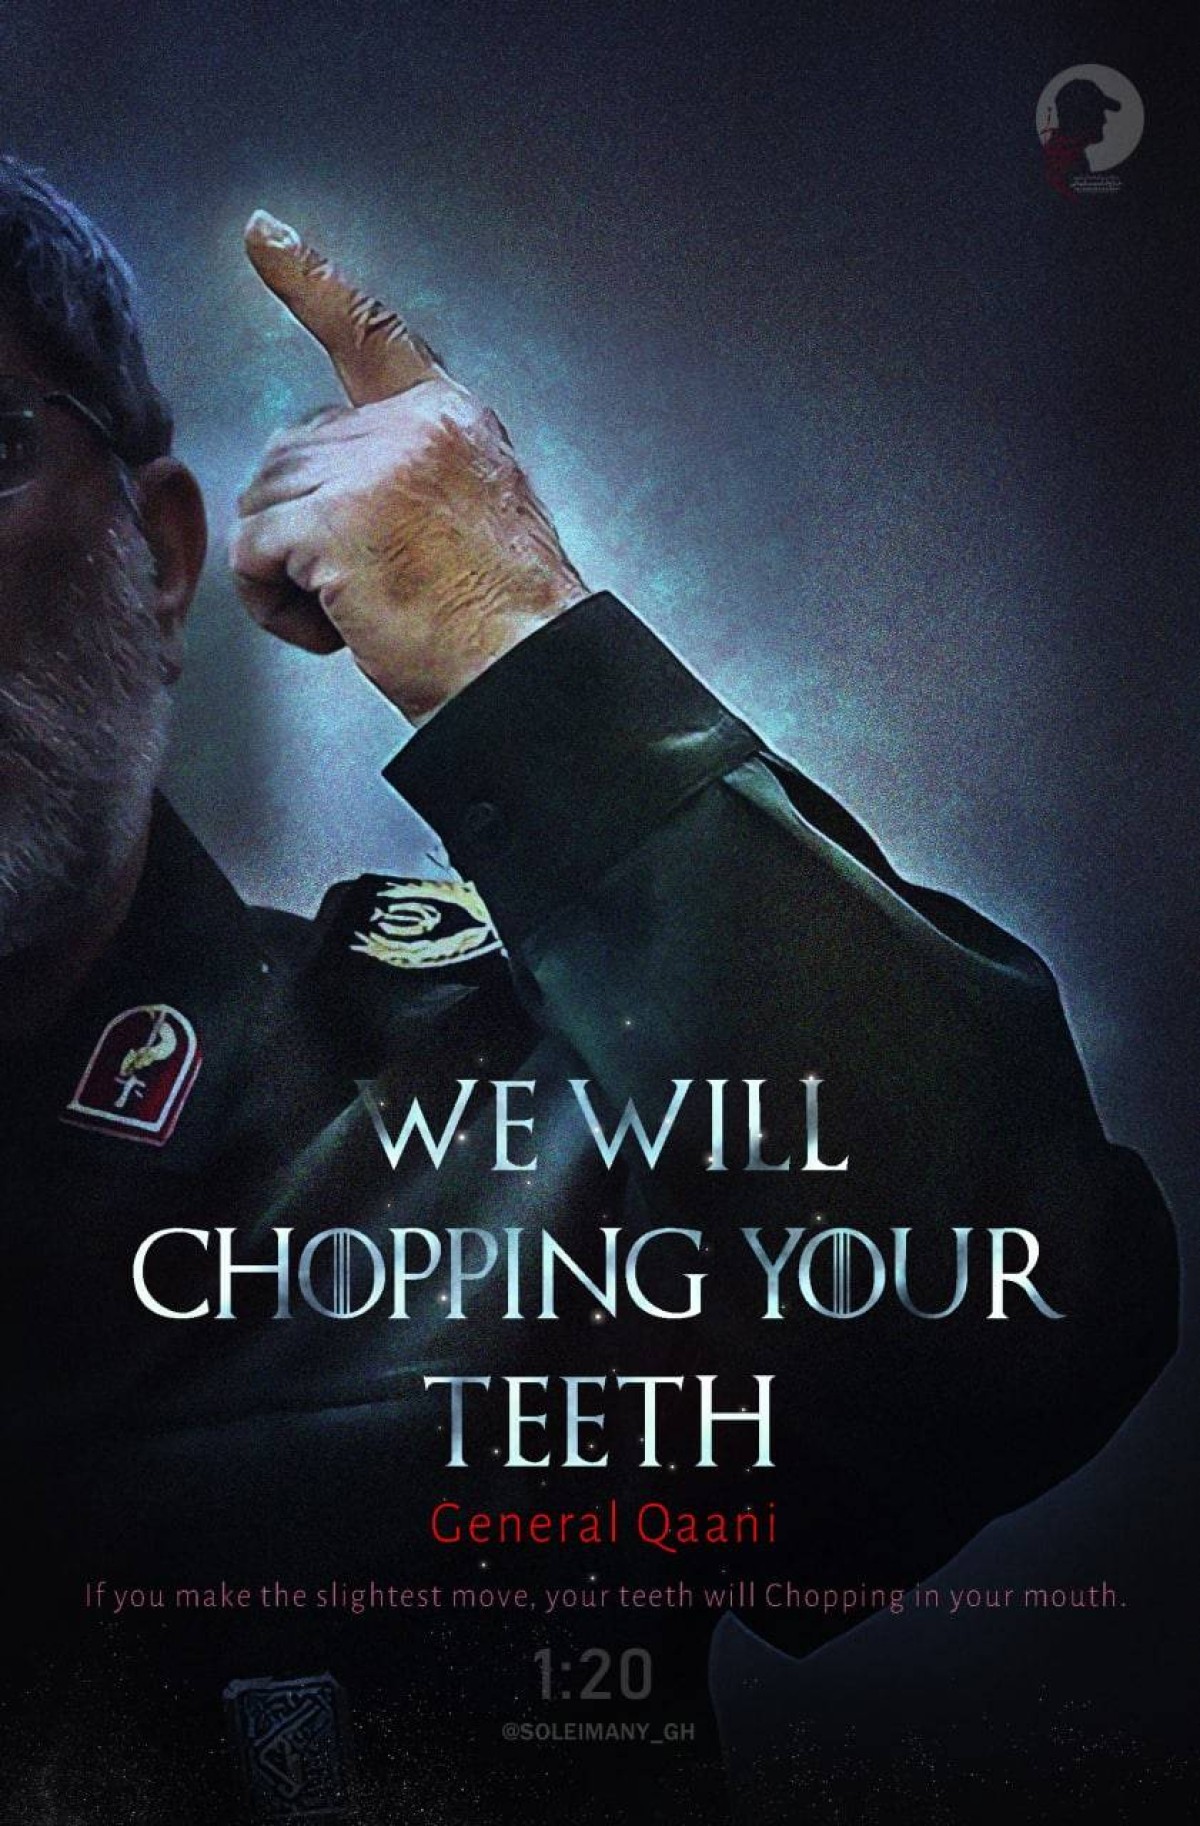 General Qaani : If you make the slightest move, your teeth will Chop in your mouth!